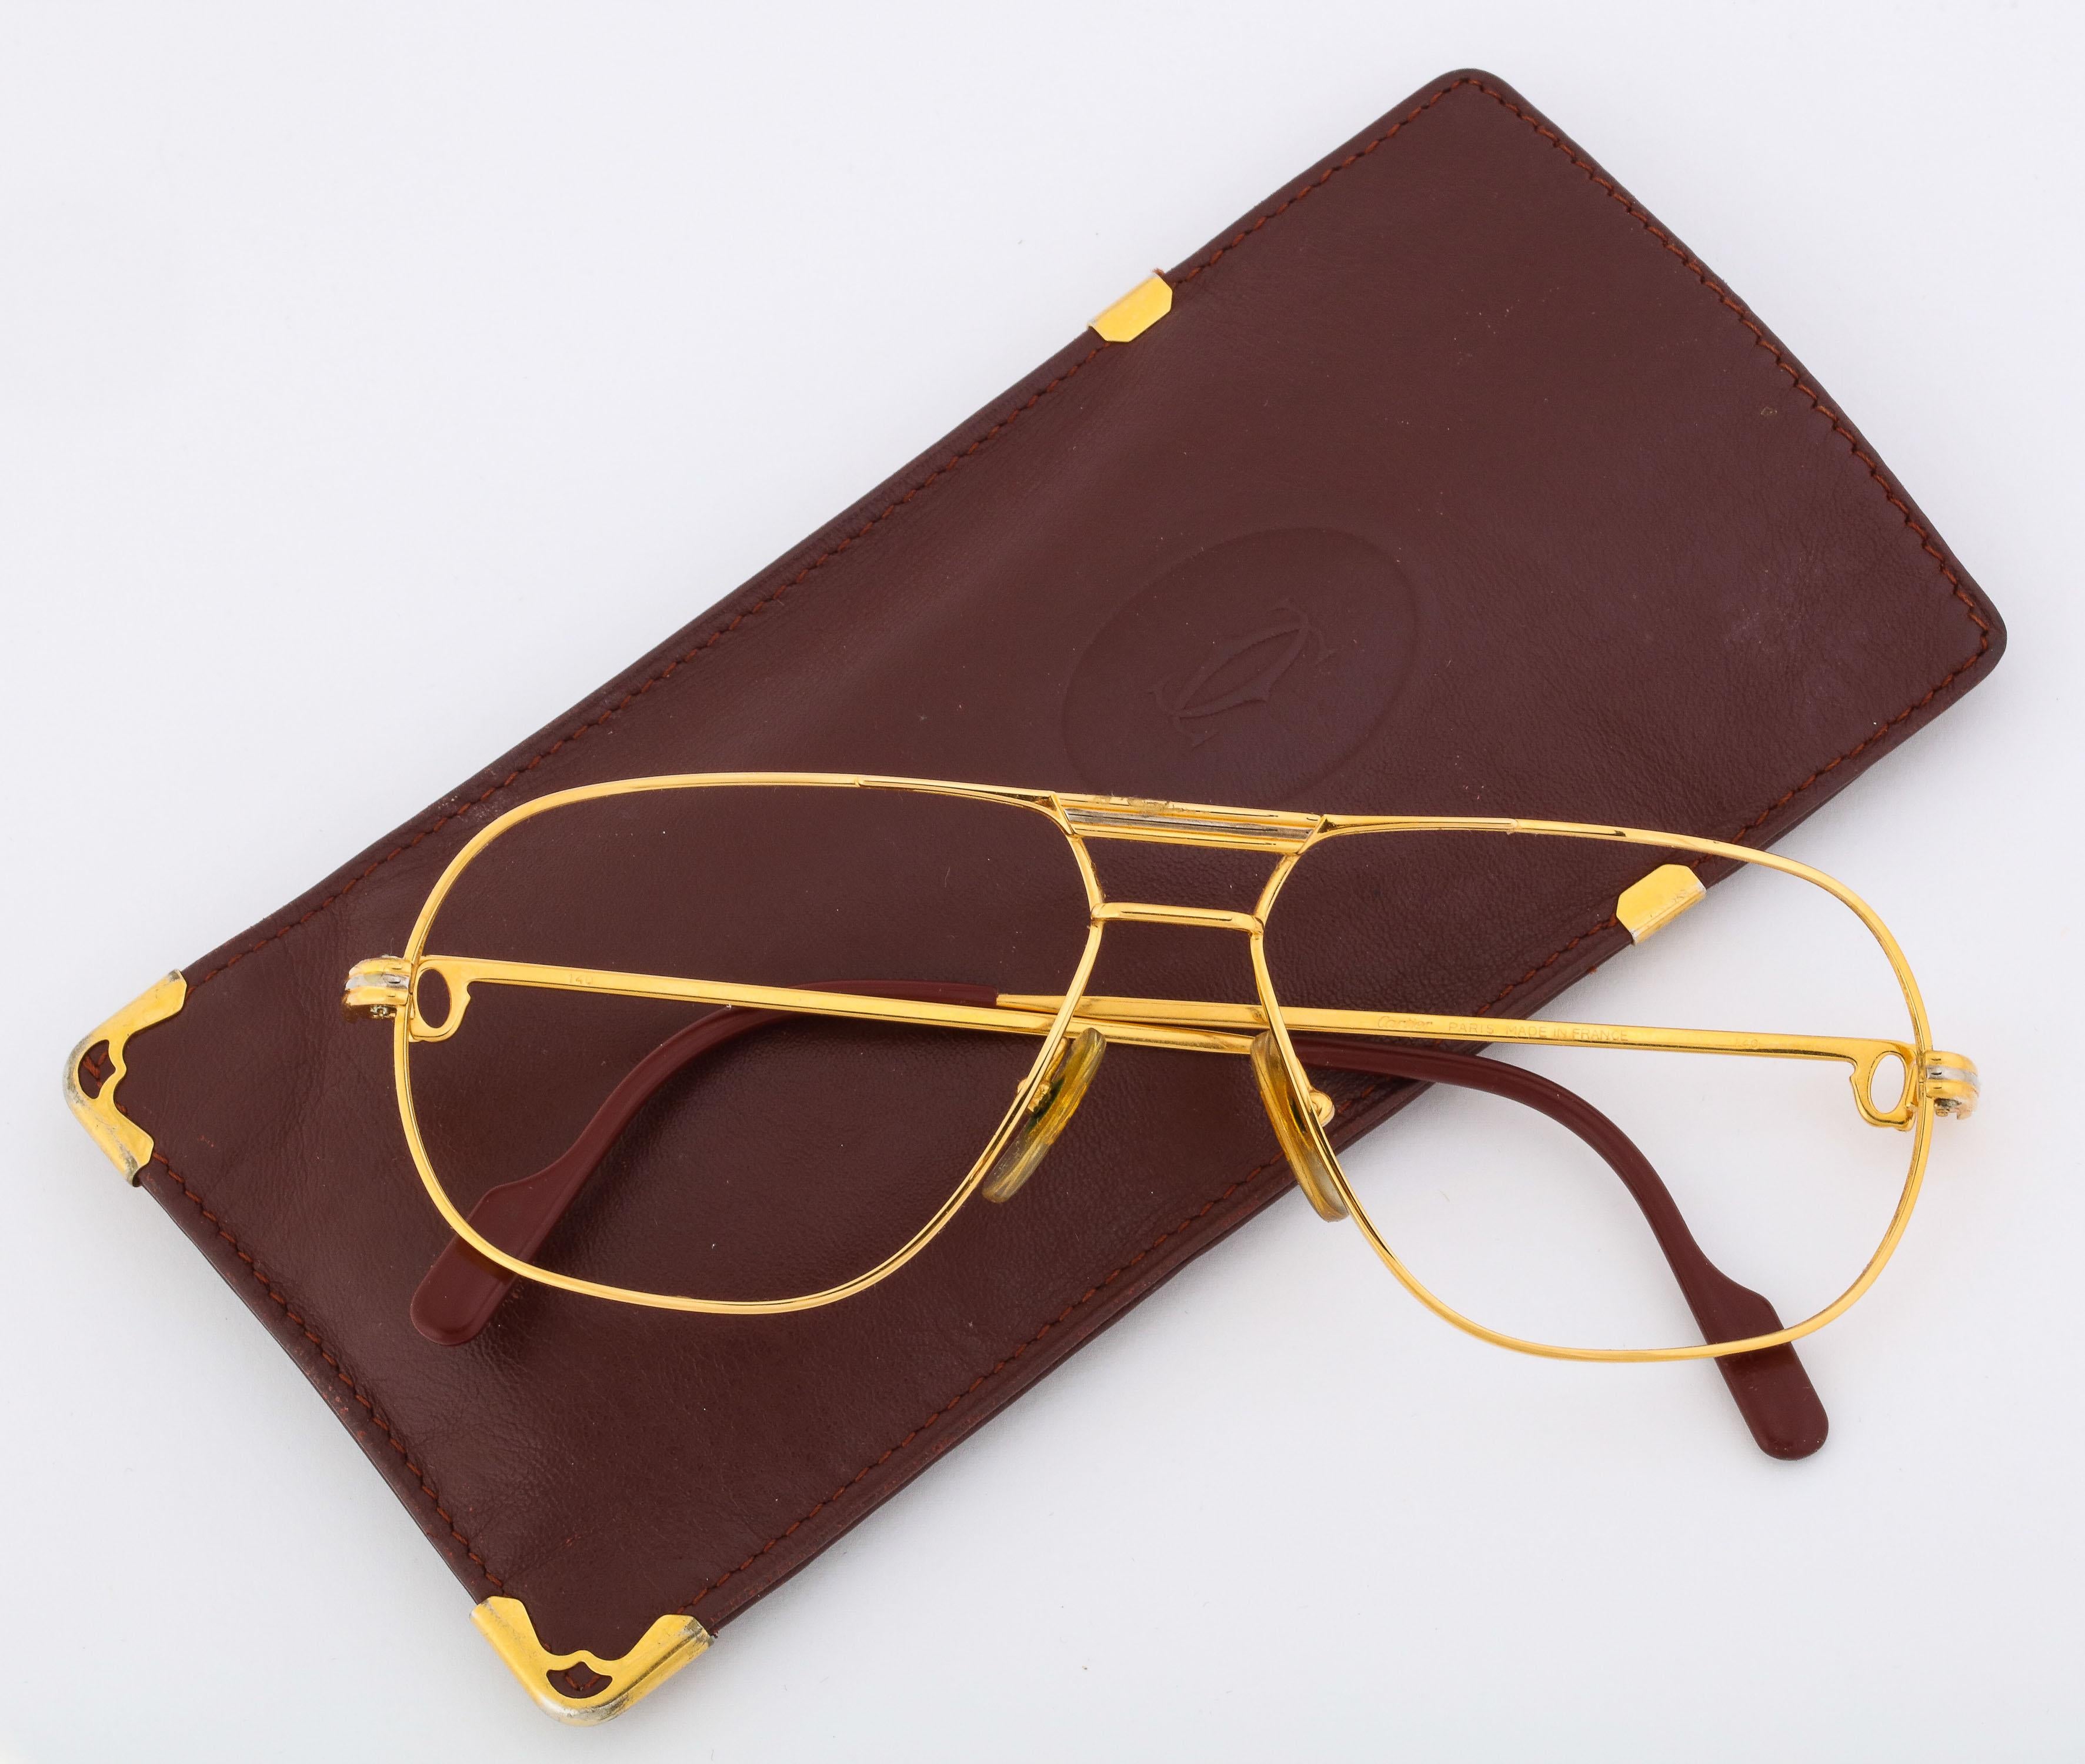 Gold frames by Cartier, C 1970. Made in France. Originally mens glasses, 5.5